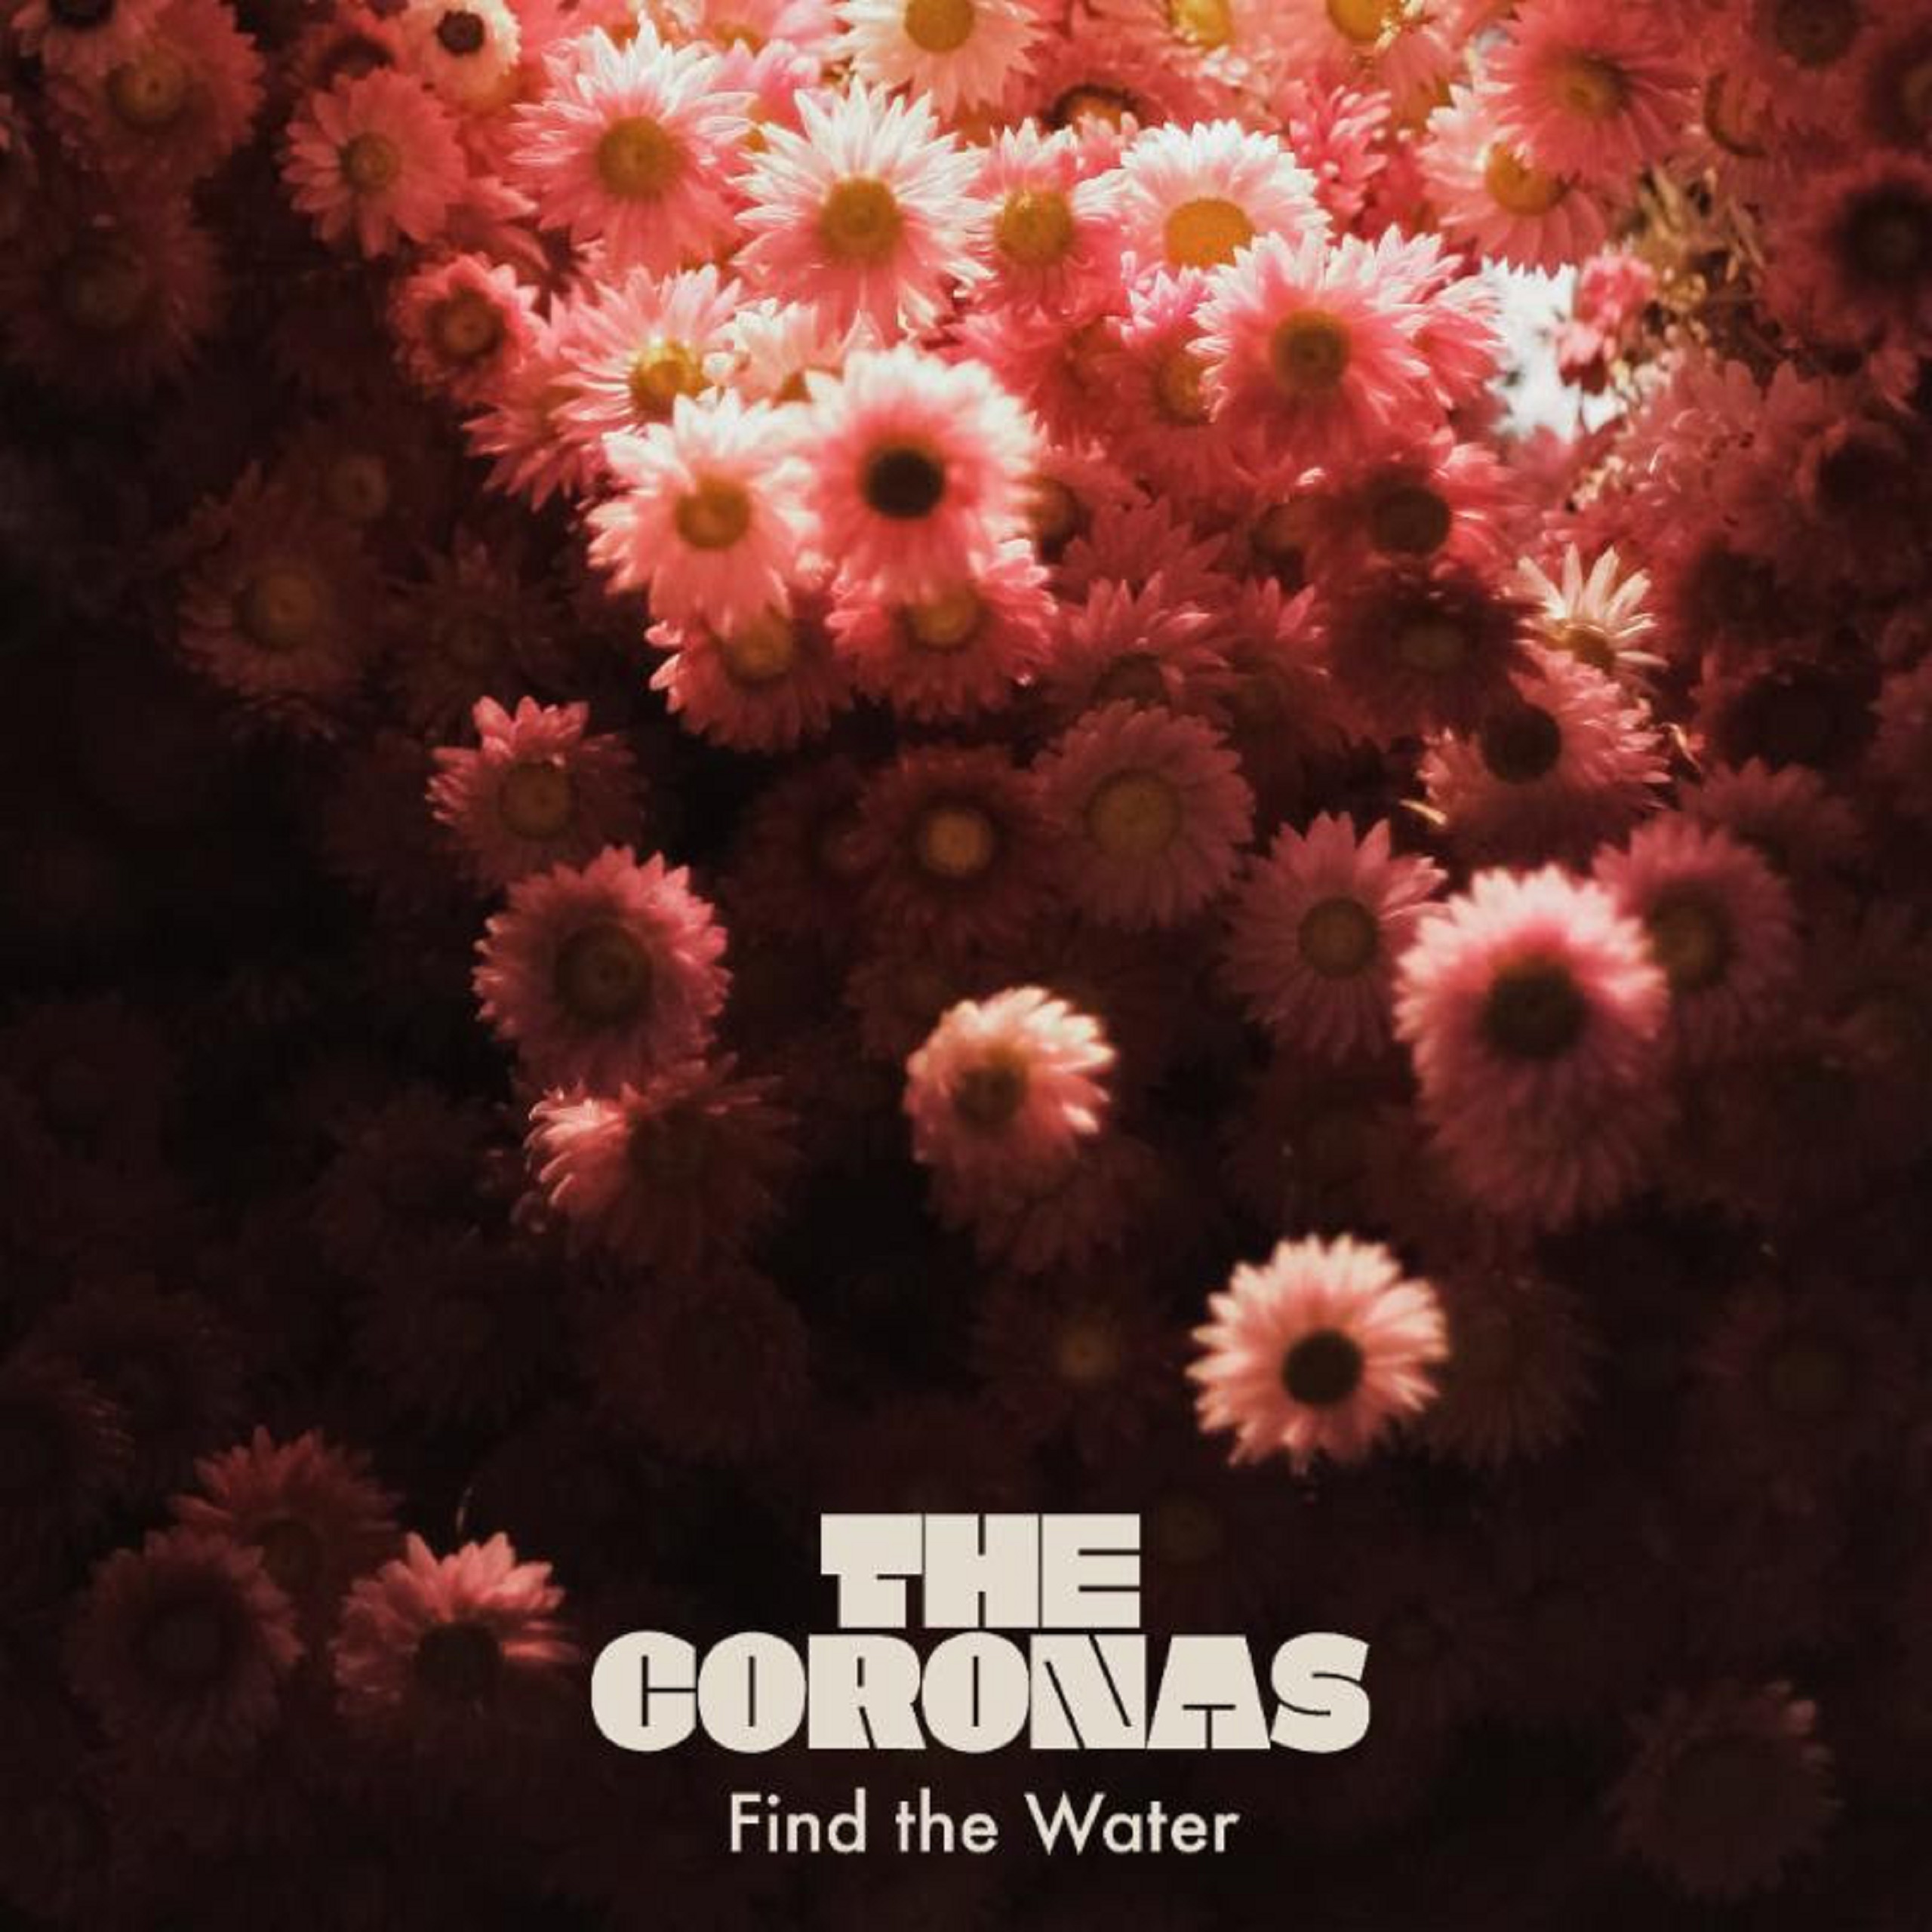 The Coronas' "Find the Water" Single Arriving this Friday